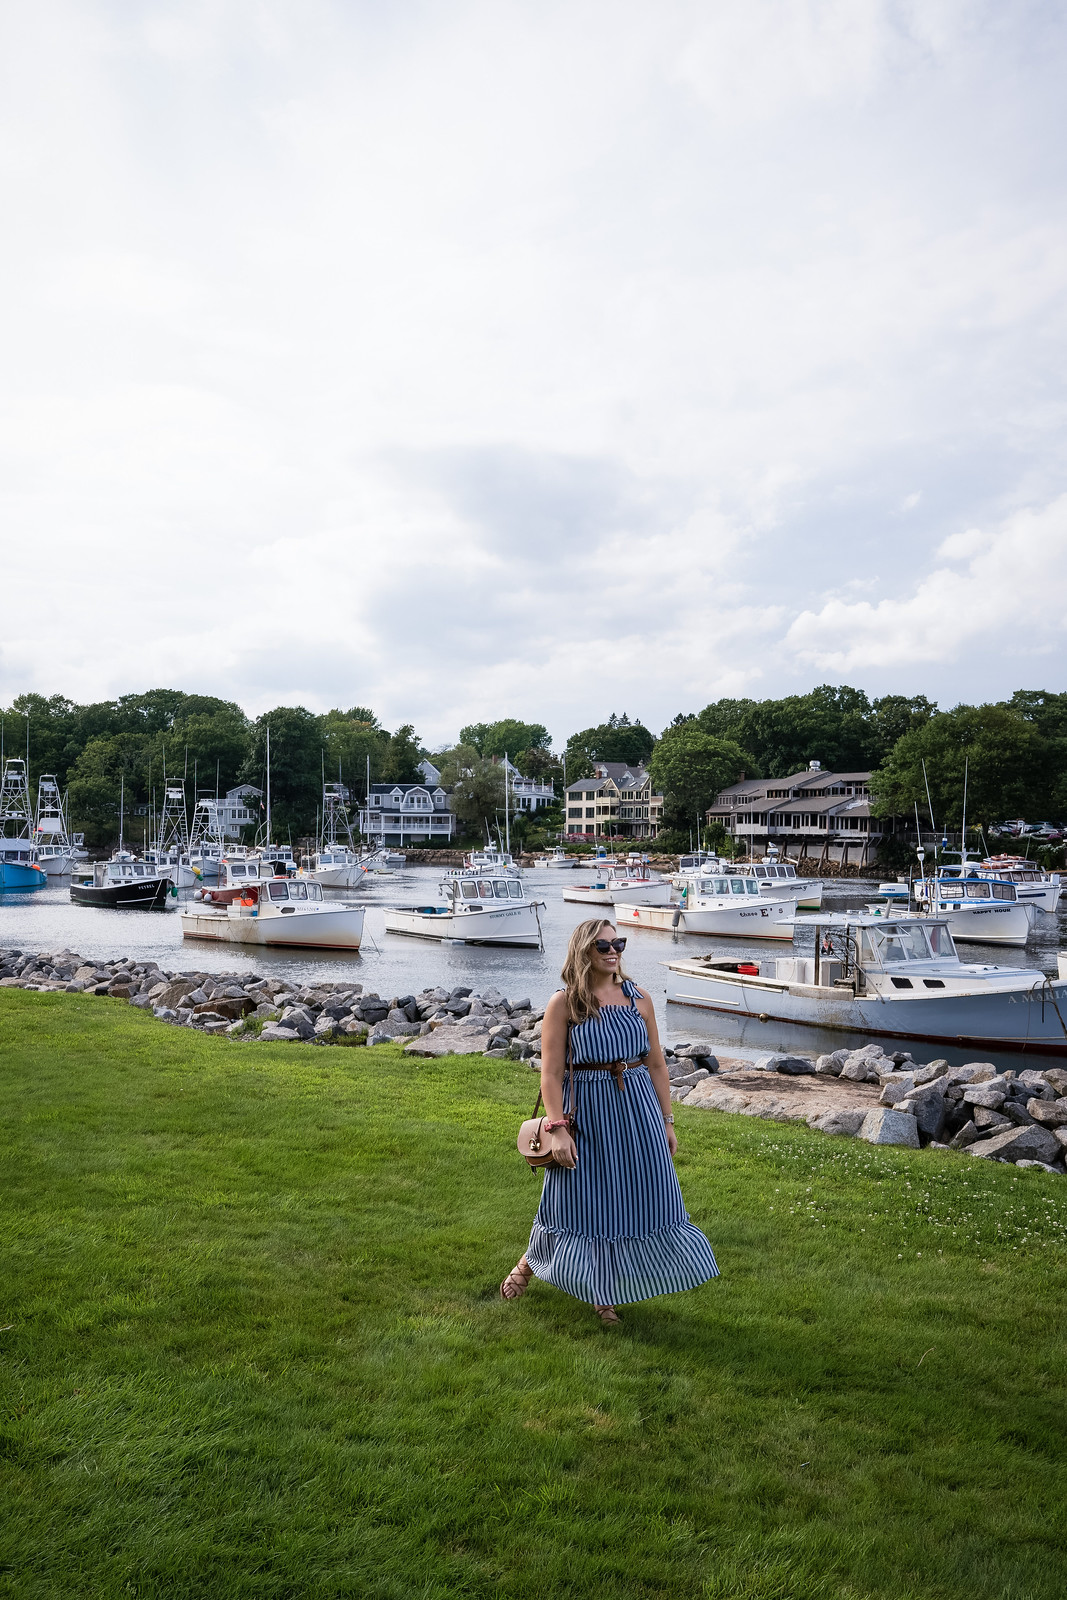 Summer in Ogunquit, Maine | New England Road Trip Itinerary - New England Road Trip - The Ultimate 7 Day Itinerary - The Perfect Summer New England Road Trip Itinerary